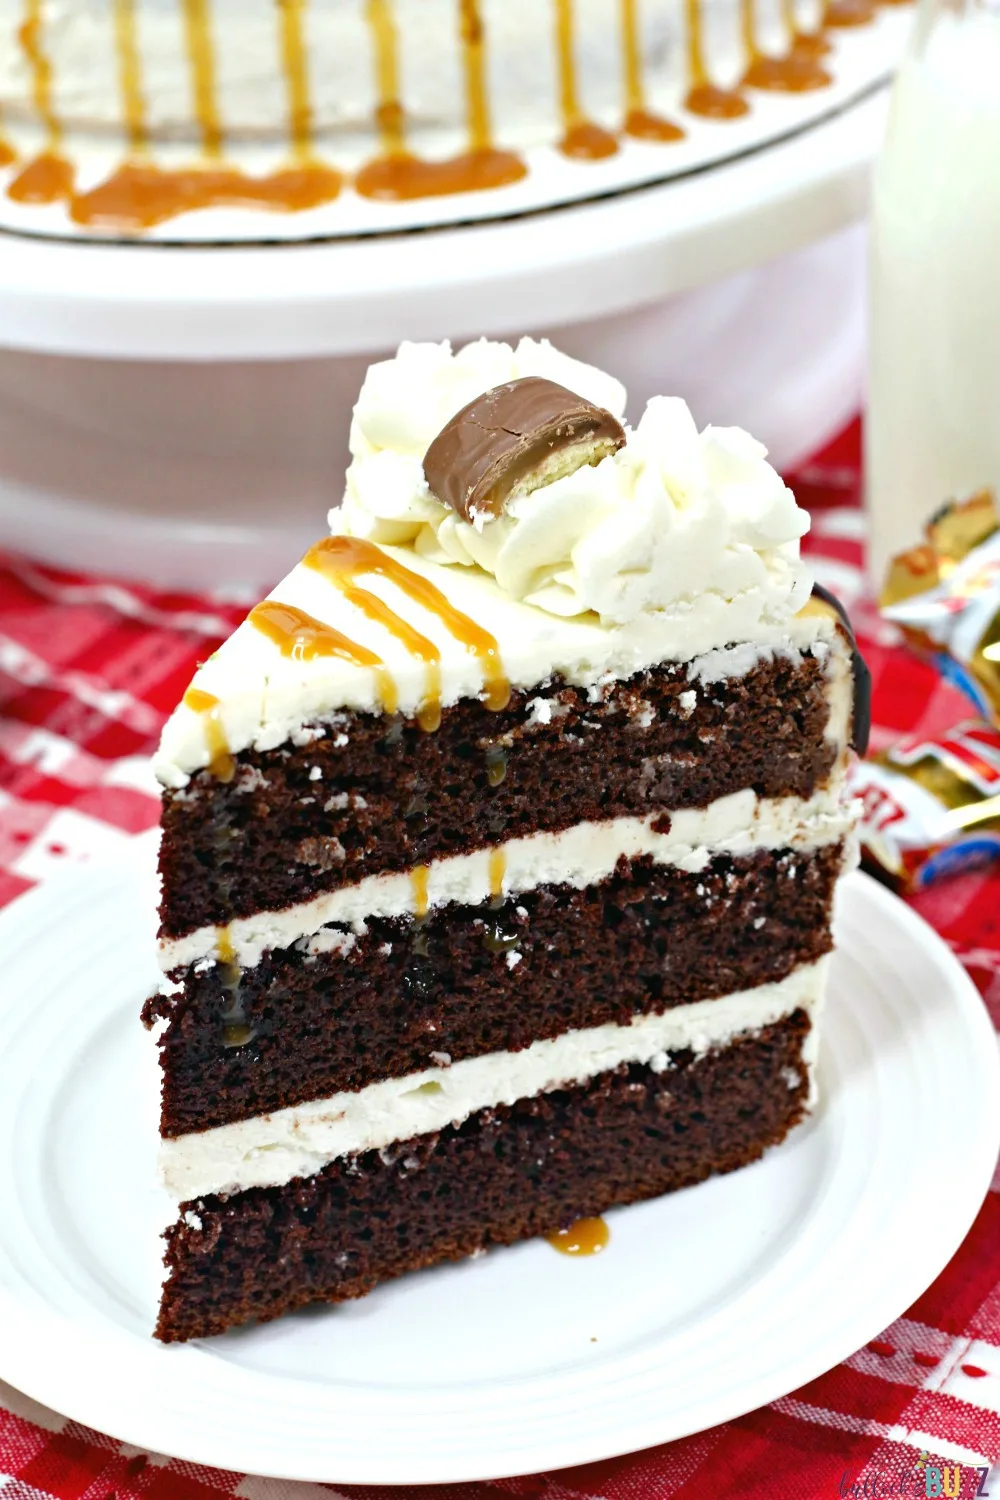 Rich, chocolate cake and buttery caramel frosting is topped off with drizzles of caramel and chocolate syrup and crowned with bite-sized pieces of Twix candy bars in this best-ever Twix cake recipe! #cakes #recipe #TwixCake